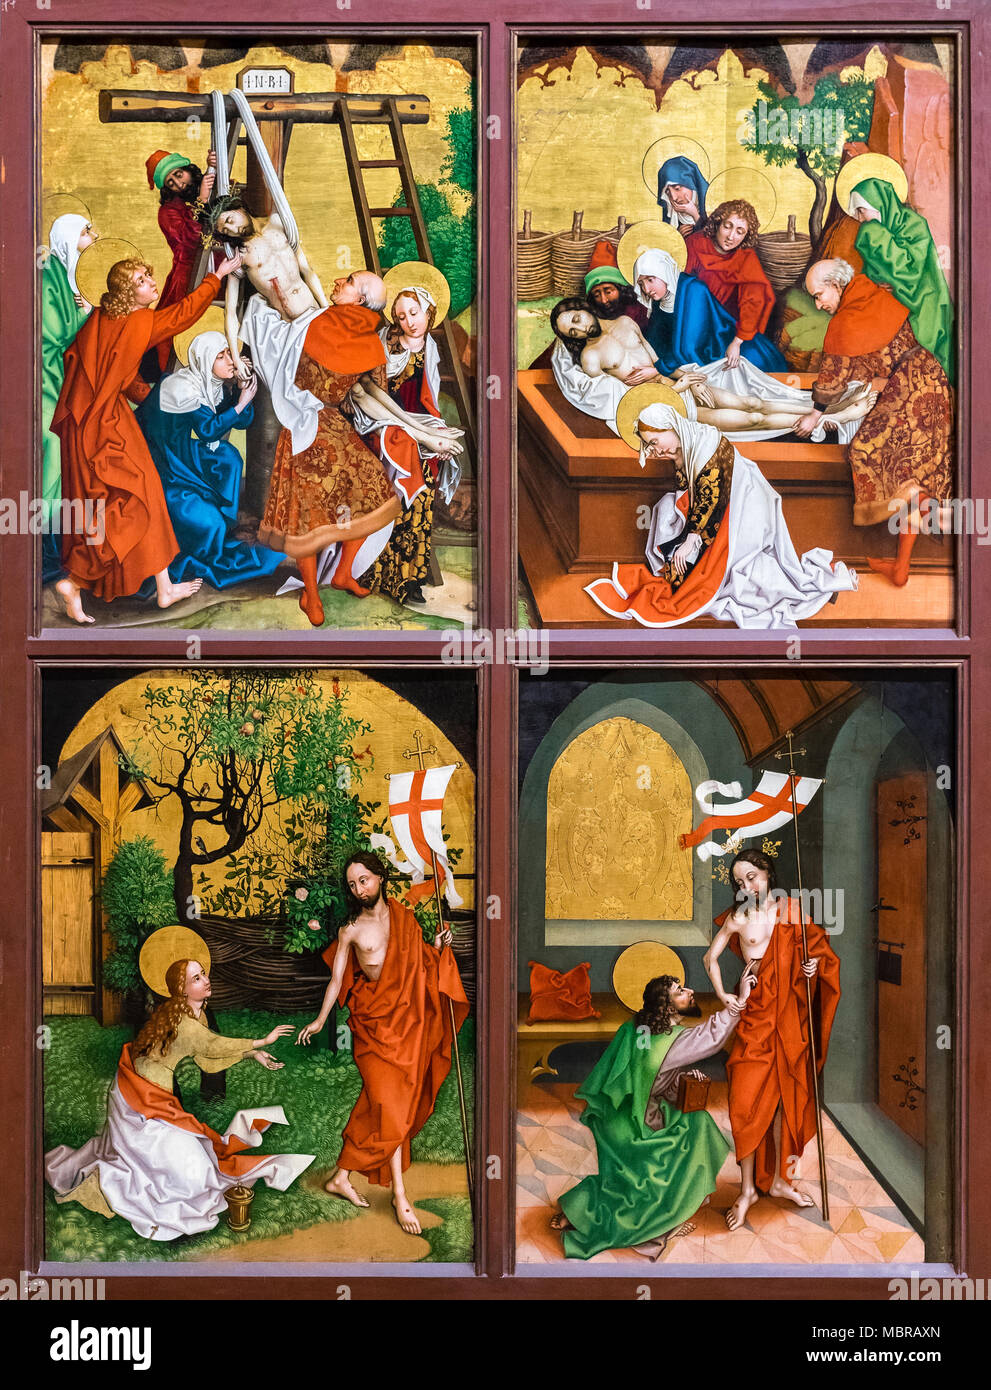 Cycle of paintings Passion Christi, Retable des Dominicains, c. 1480, Dominican altar, Martin Schongauer, Museum Unterlinden Stock Photo